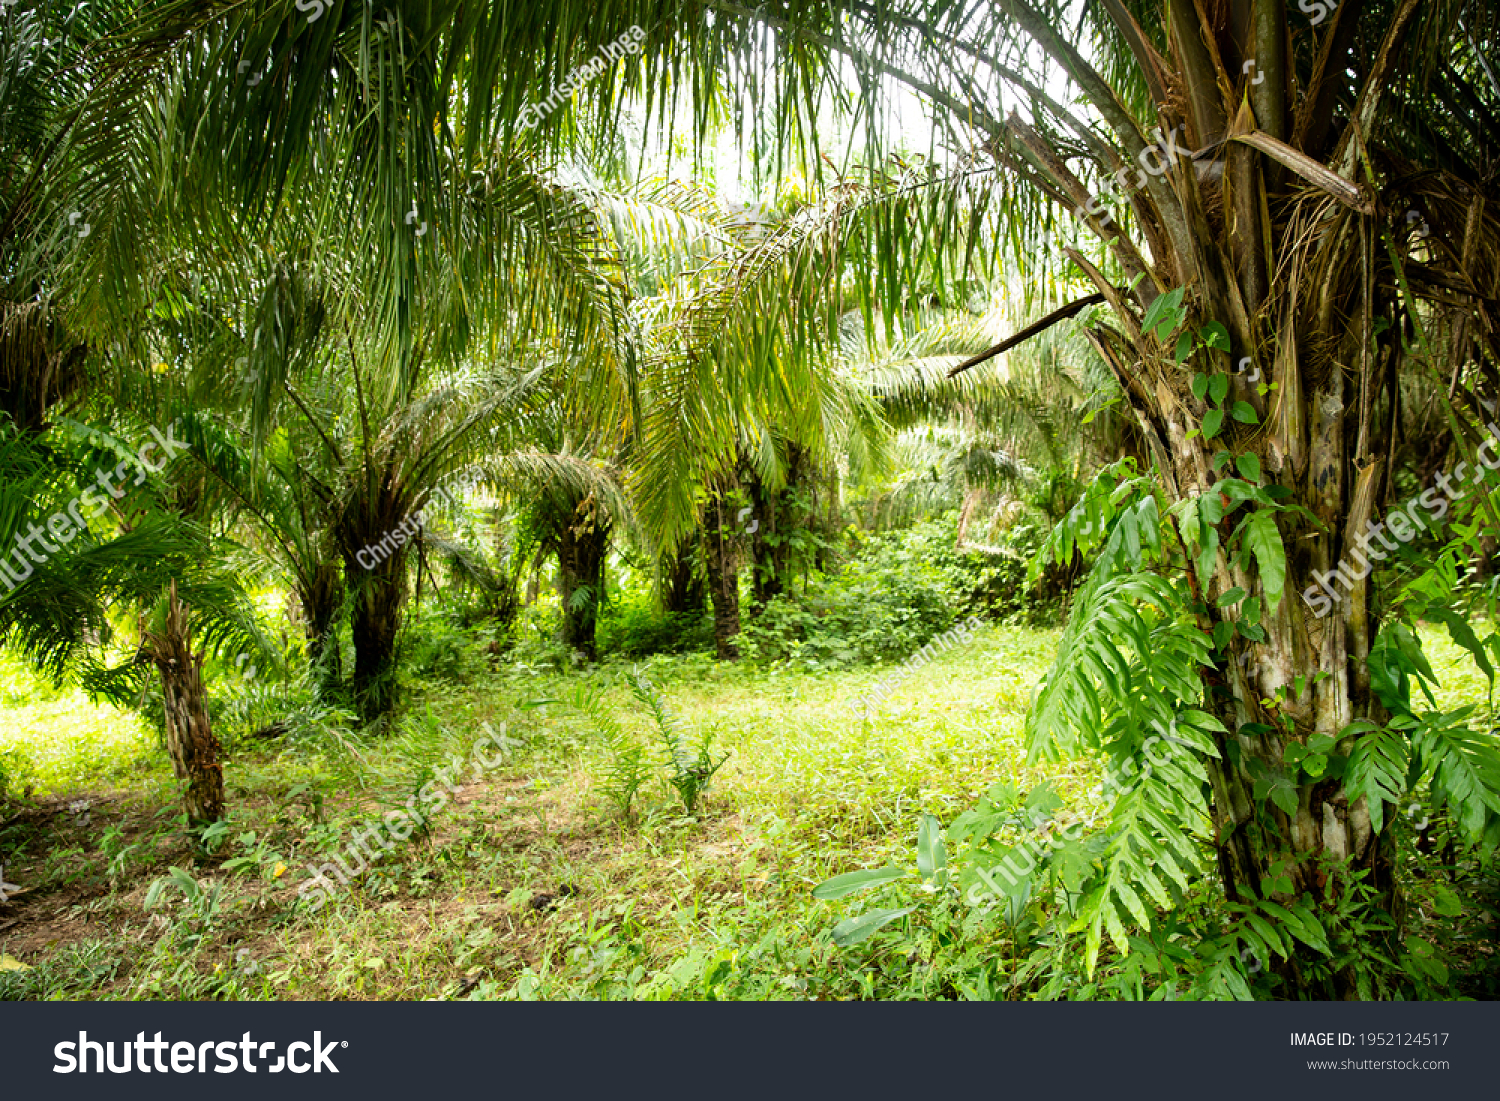 Image of Peruvian rain forest. Tropical vegetation in Amazon jungle. Sunny day. #1952124517